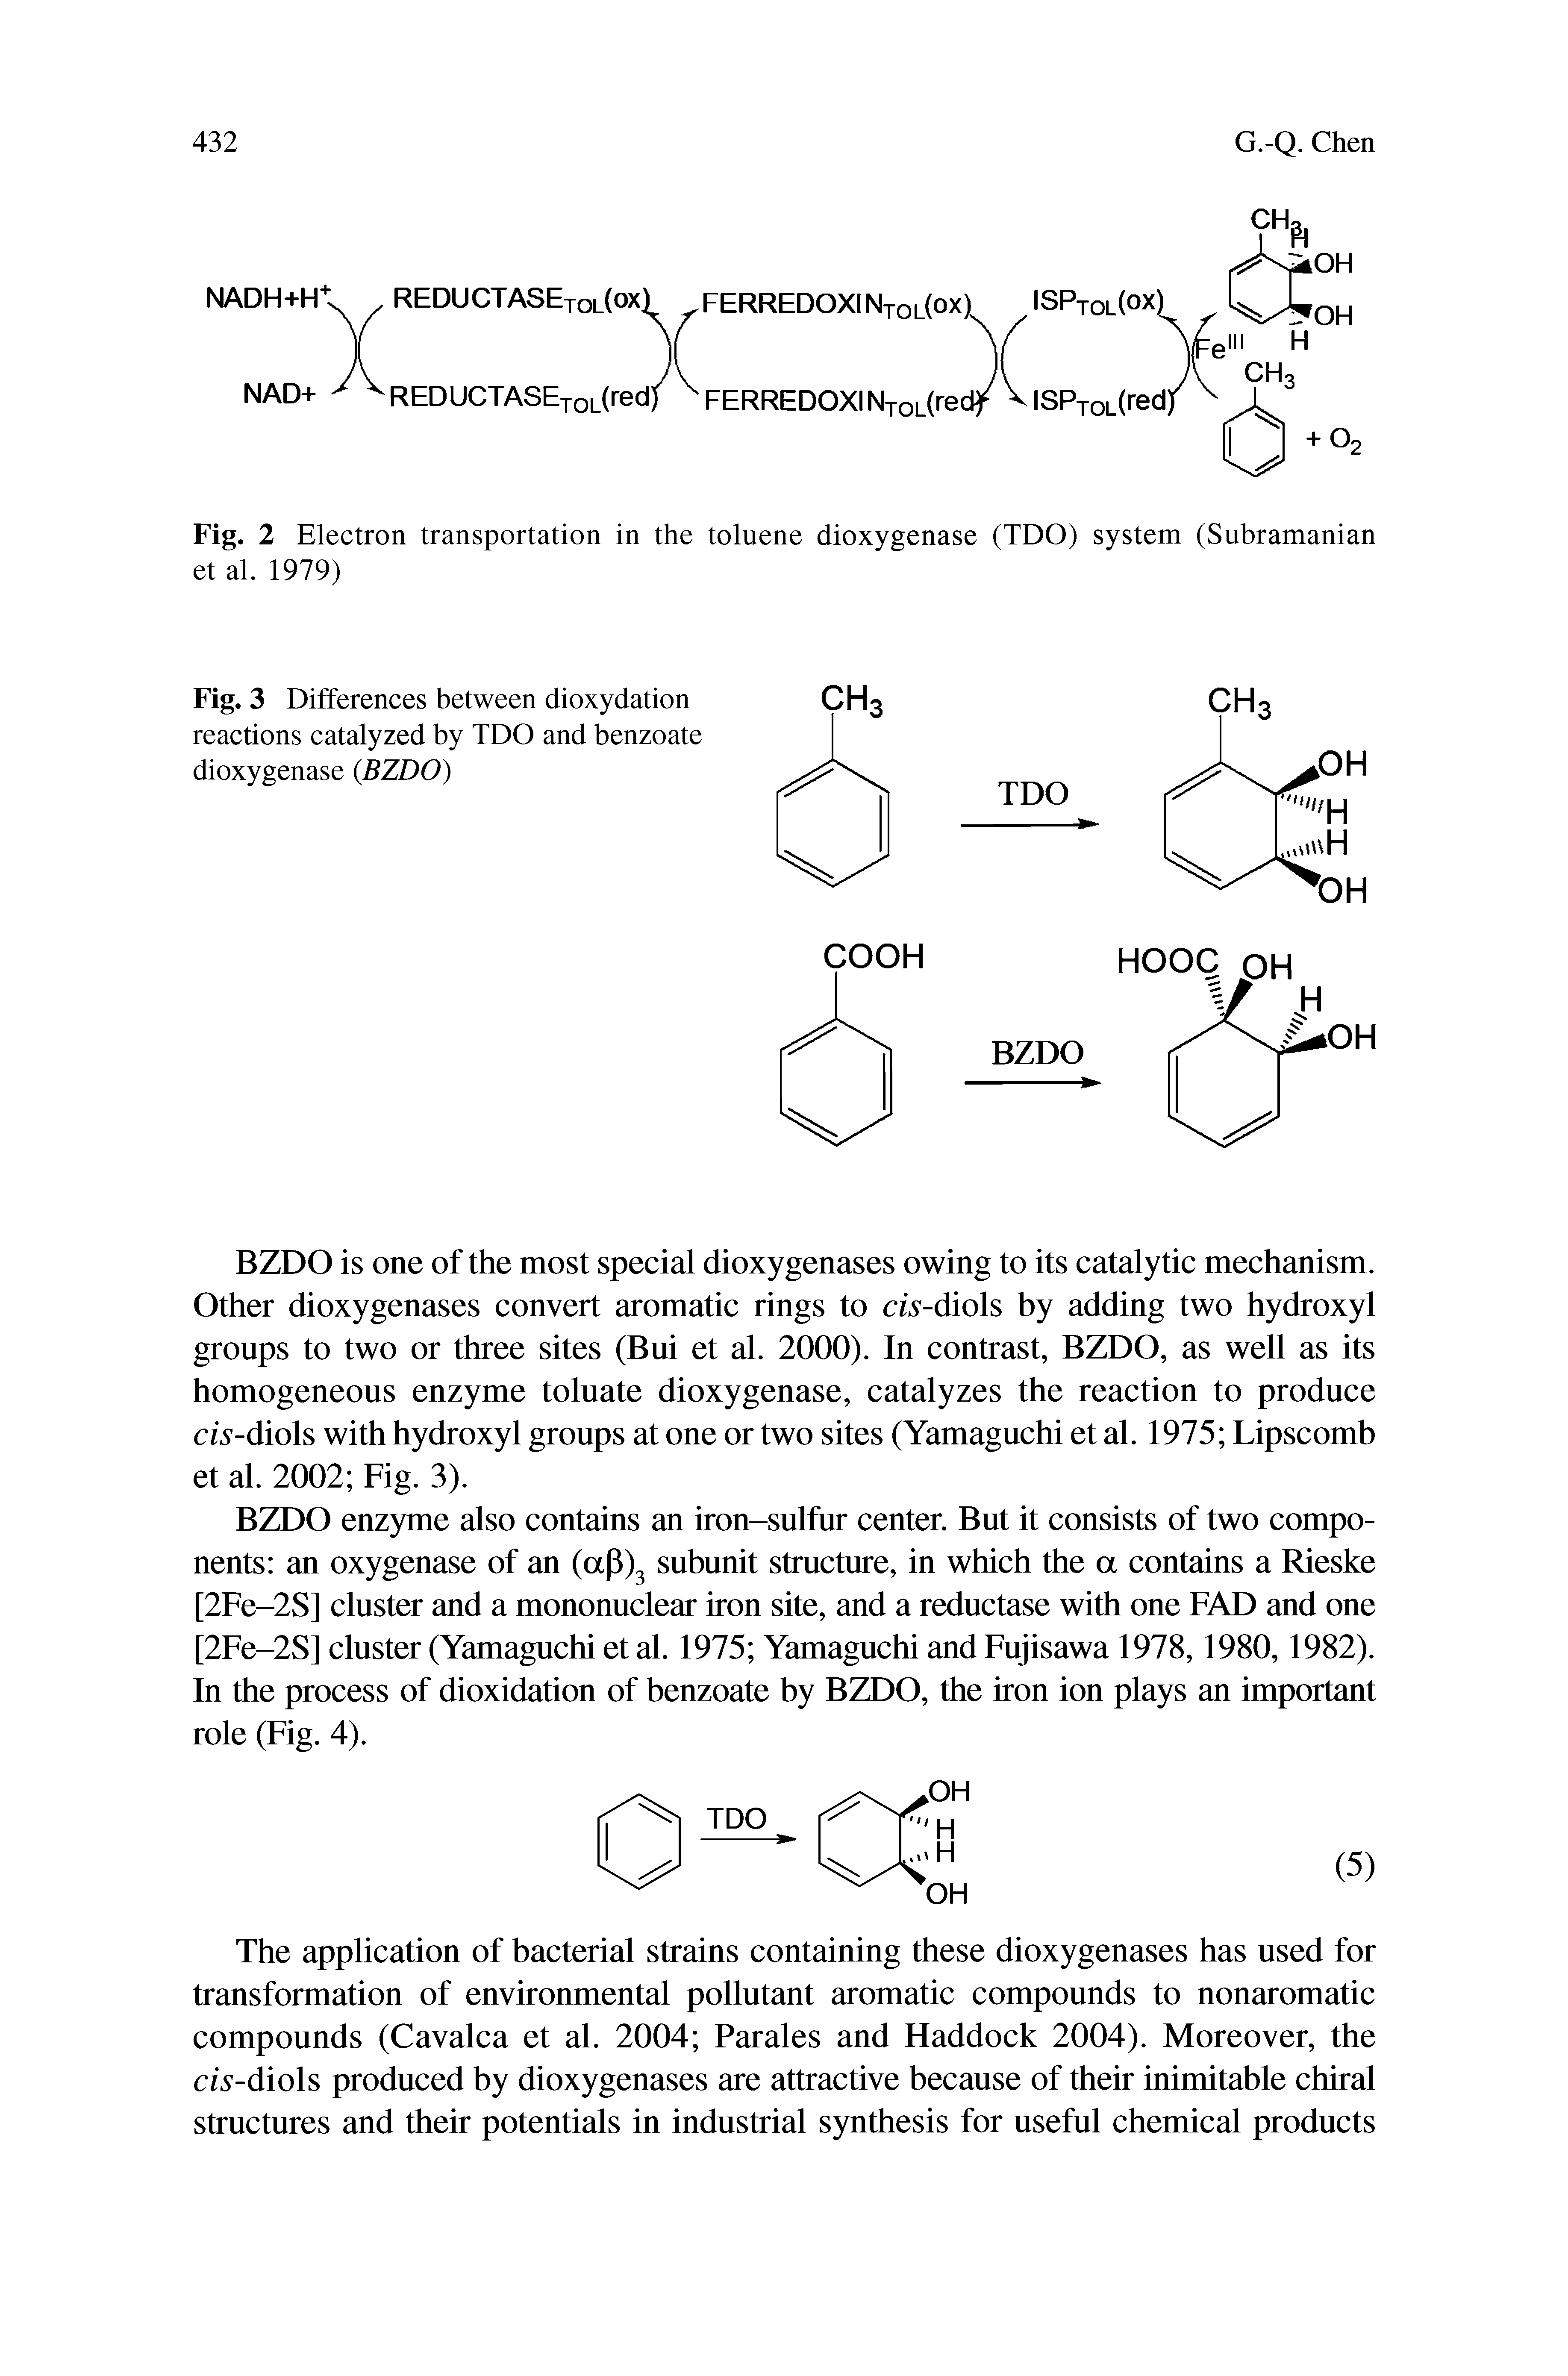 Fig. 3 Differences between dioxydation reactions catalyzed by TDO and benzoate dioxygenase (BZDO)...